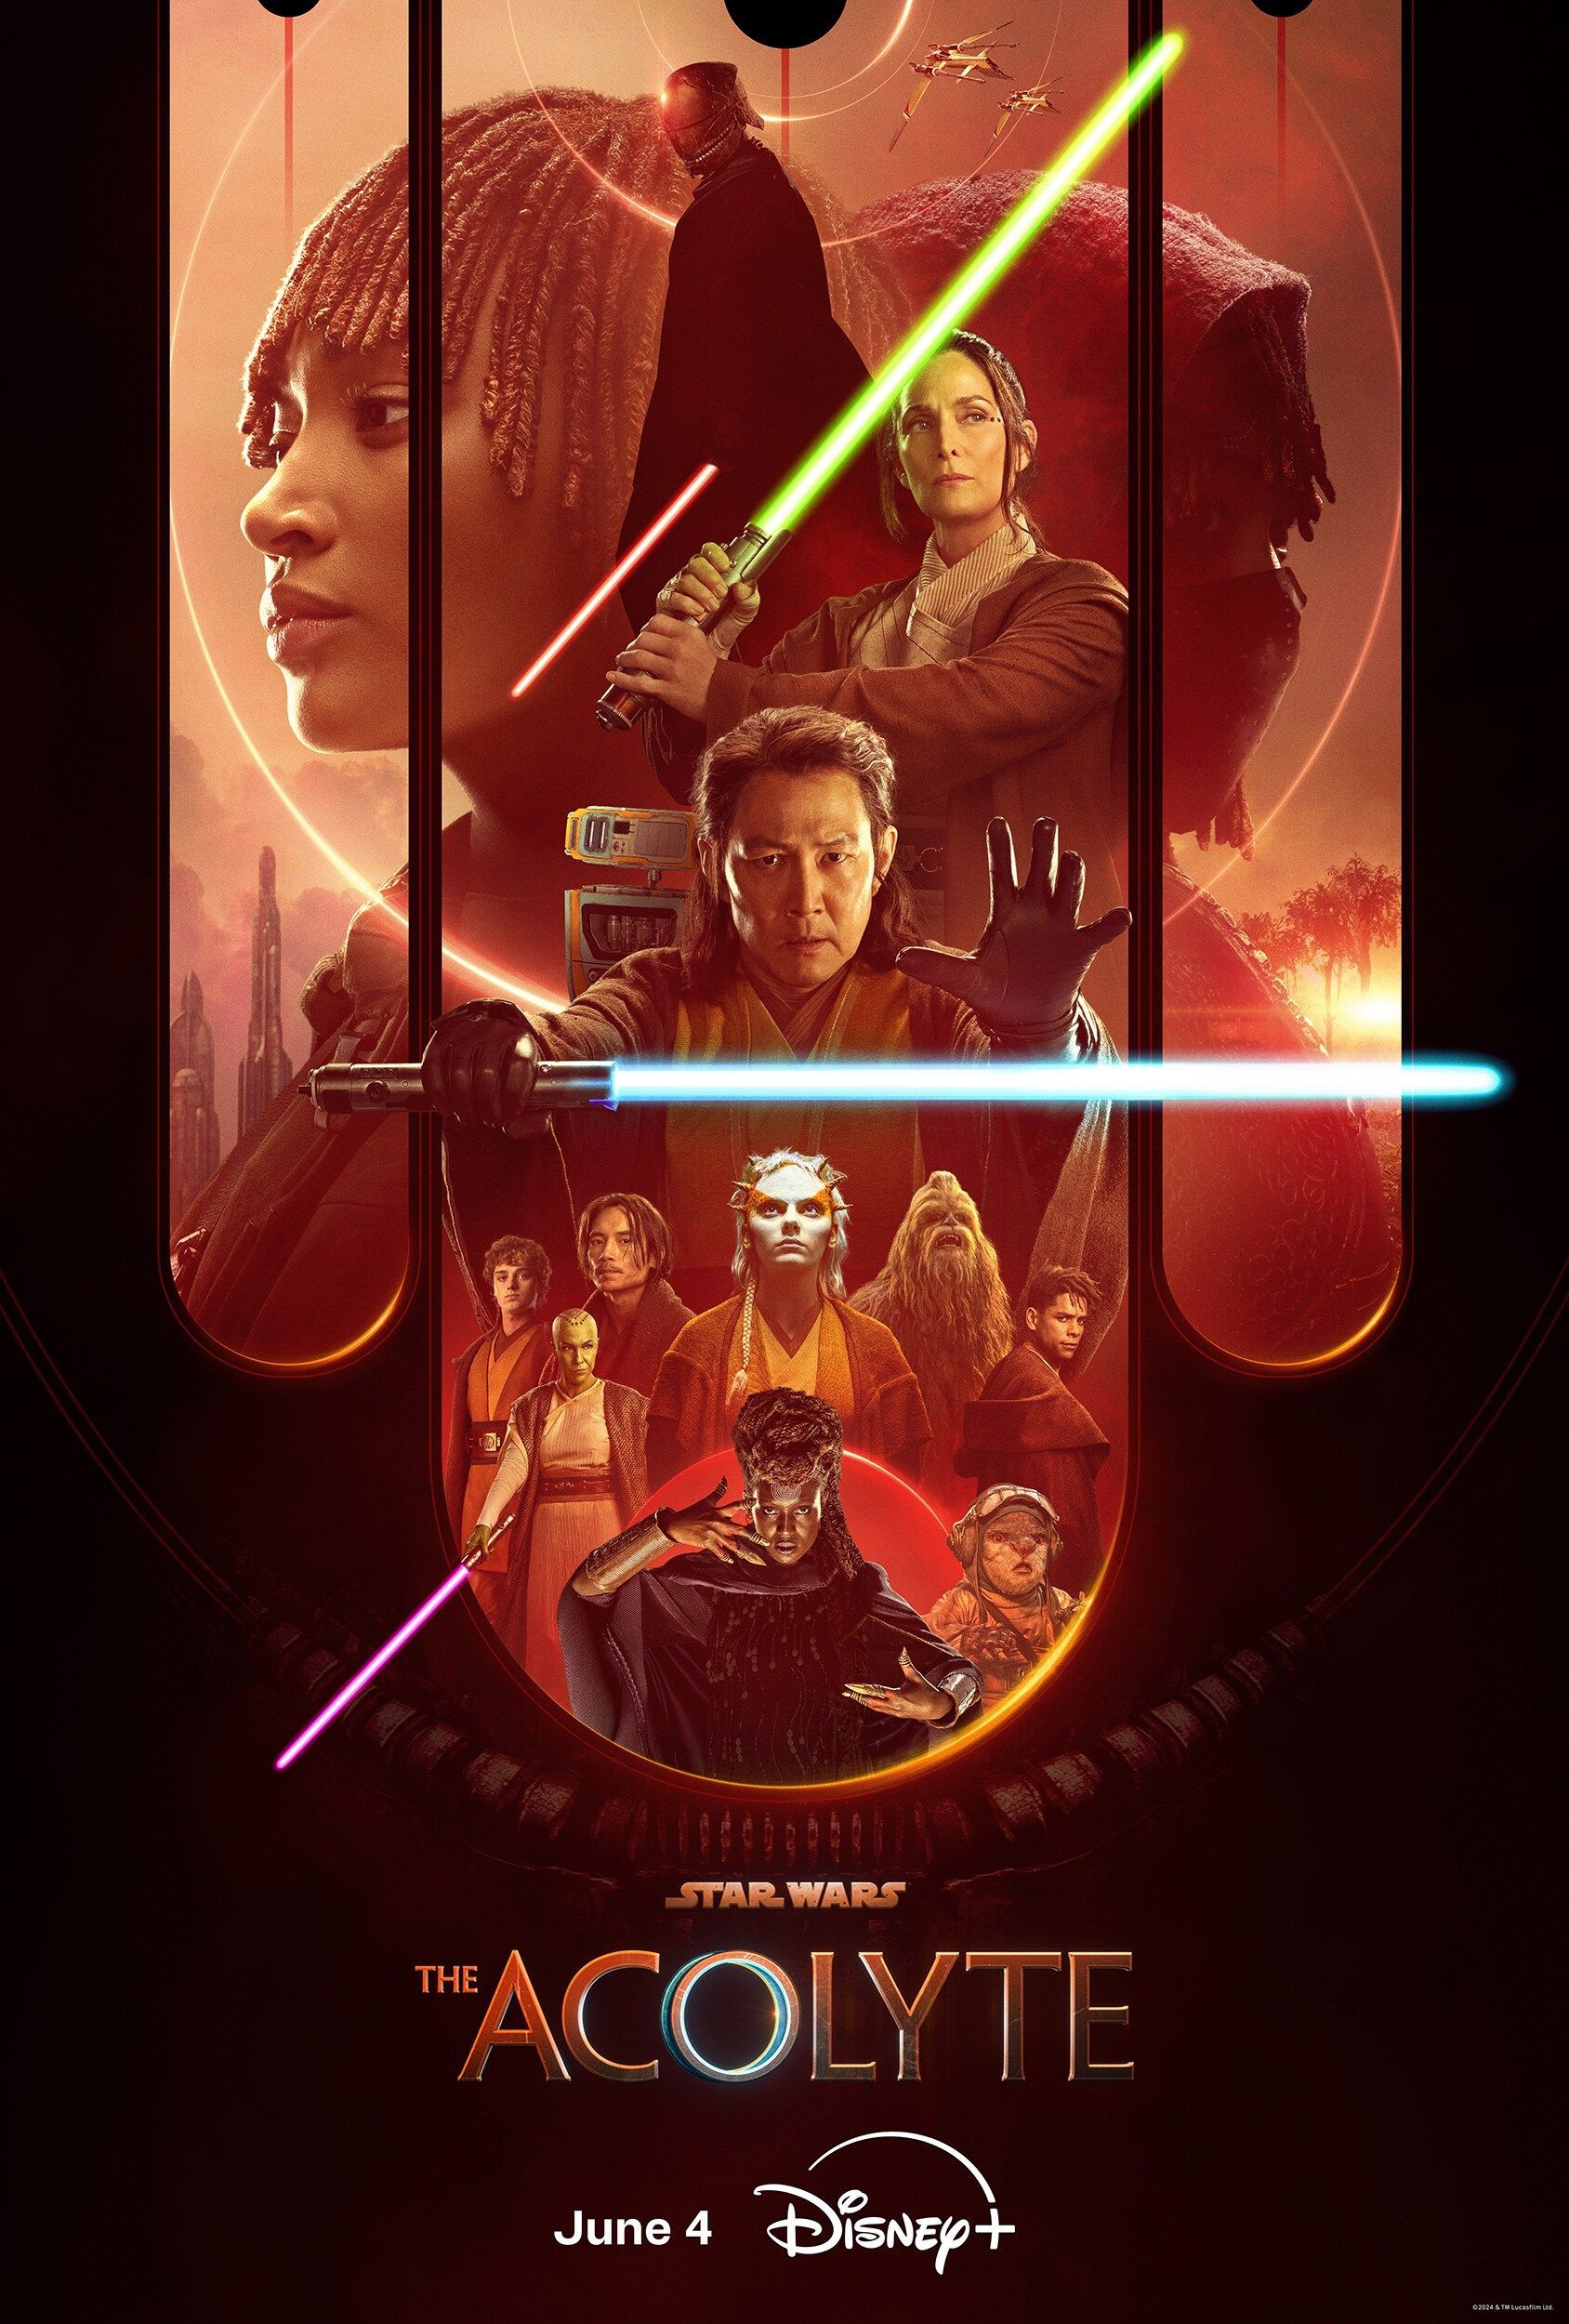 the-acolyte-poster-showing-jedi-order-mae-and-a-sith-lord-holding-lightsabers.jpeg